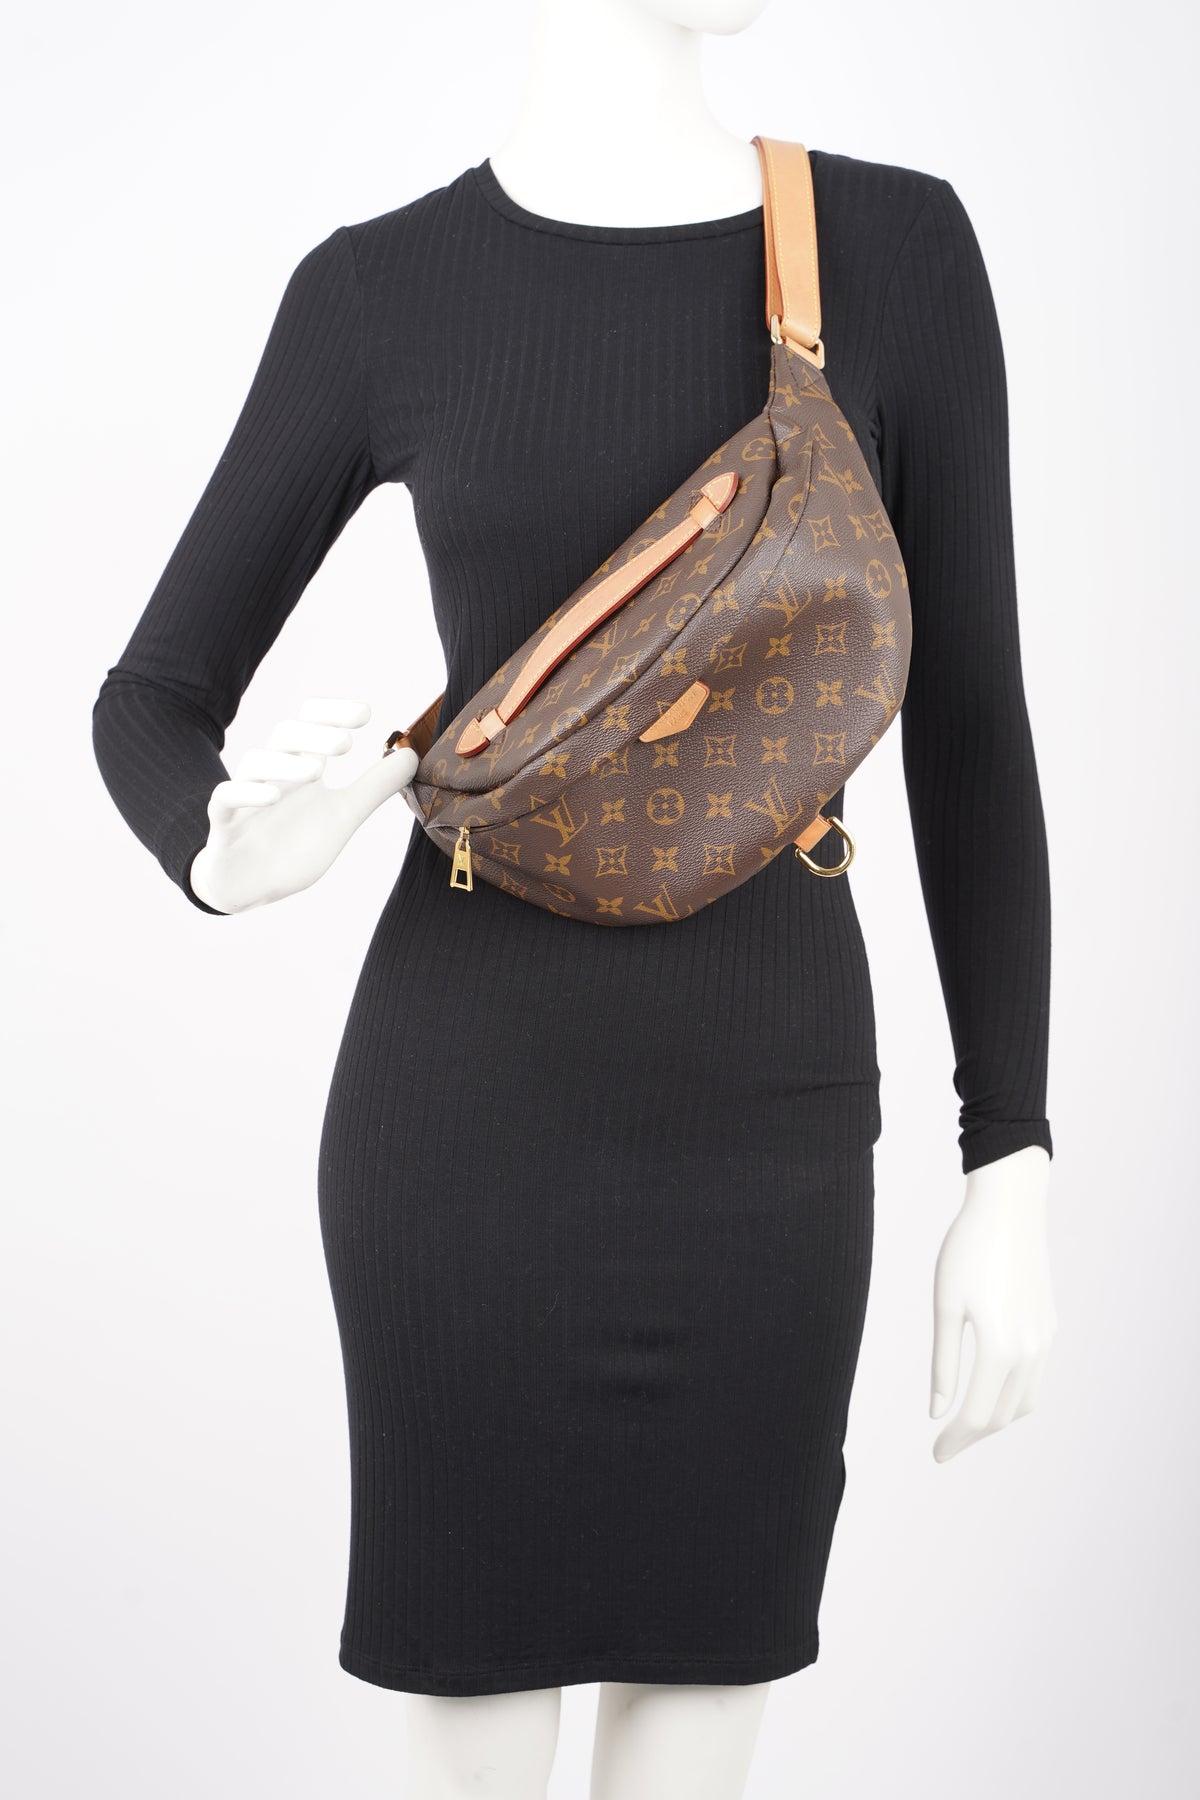 lv bumbags for women